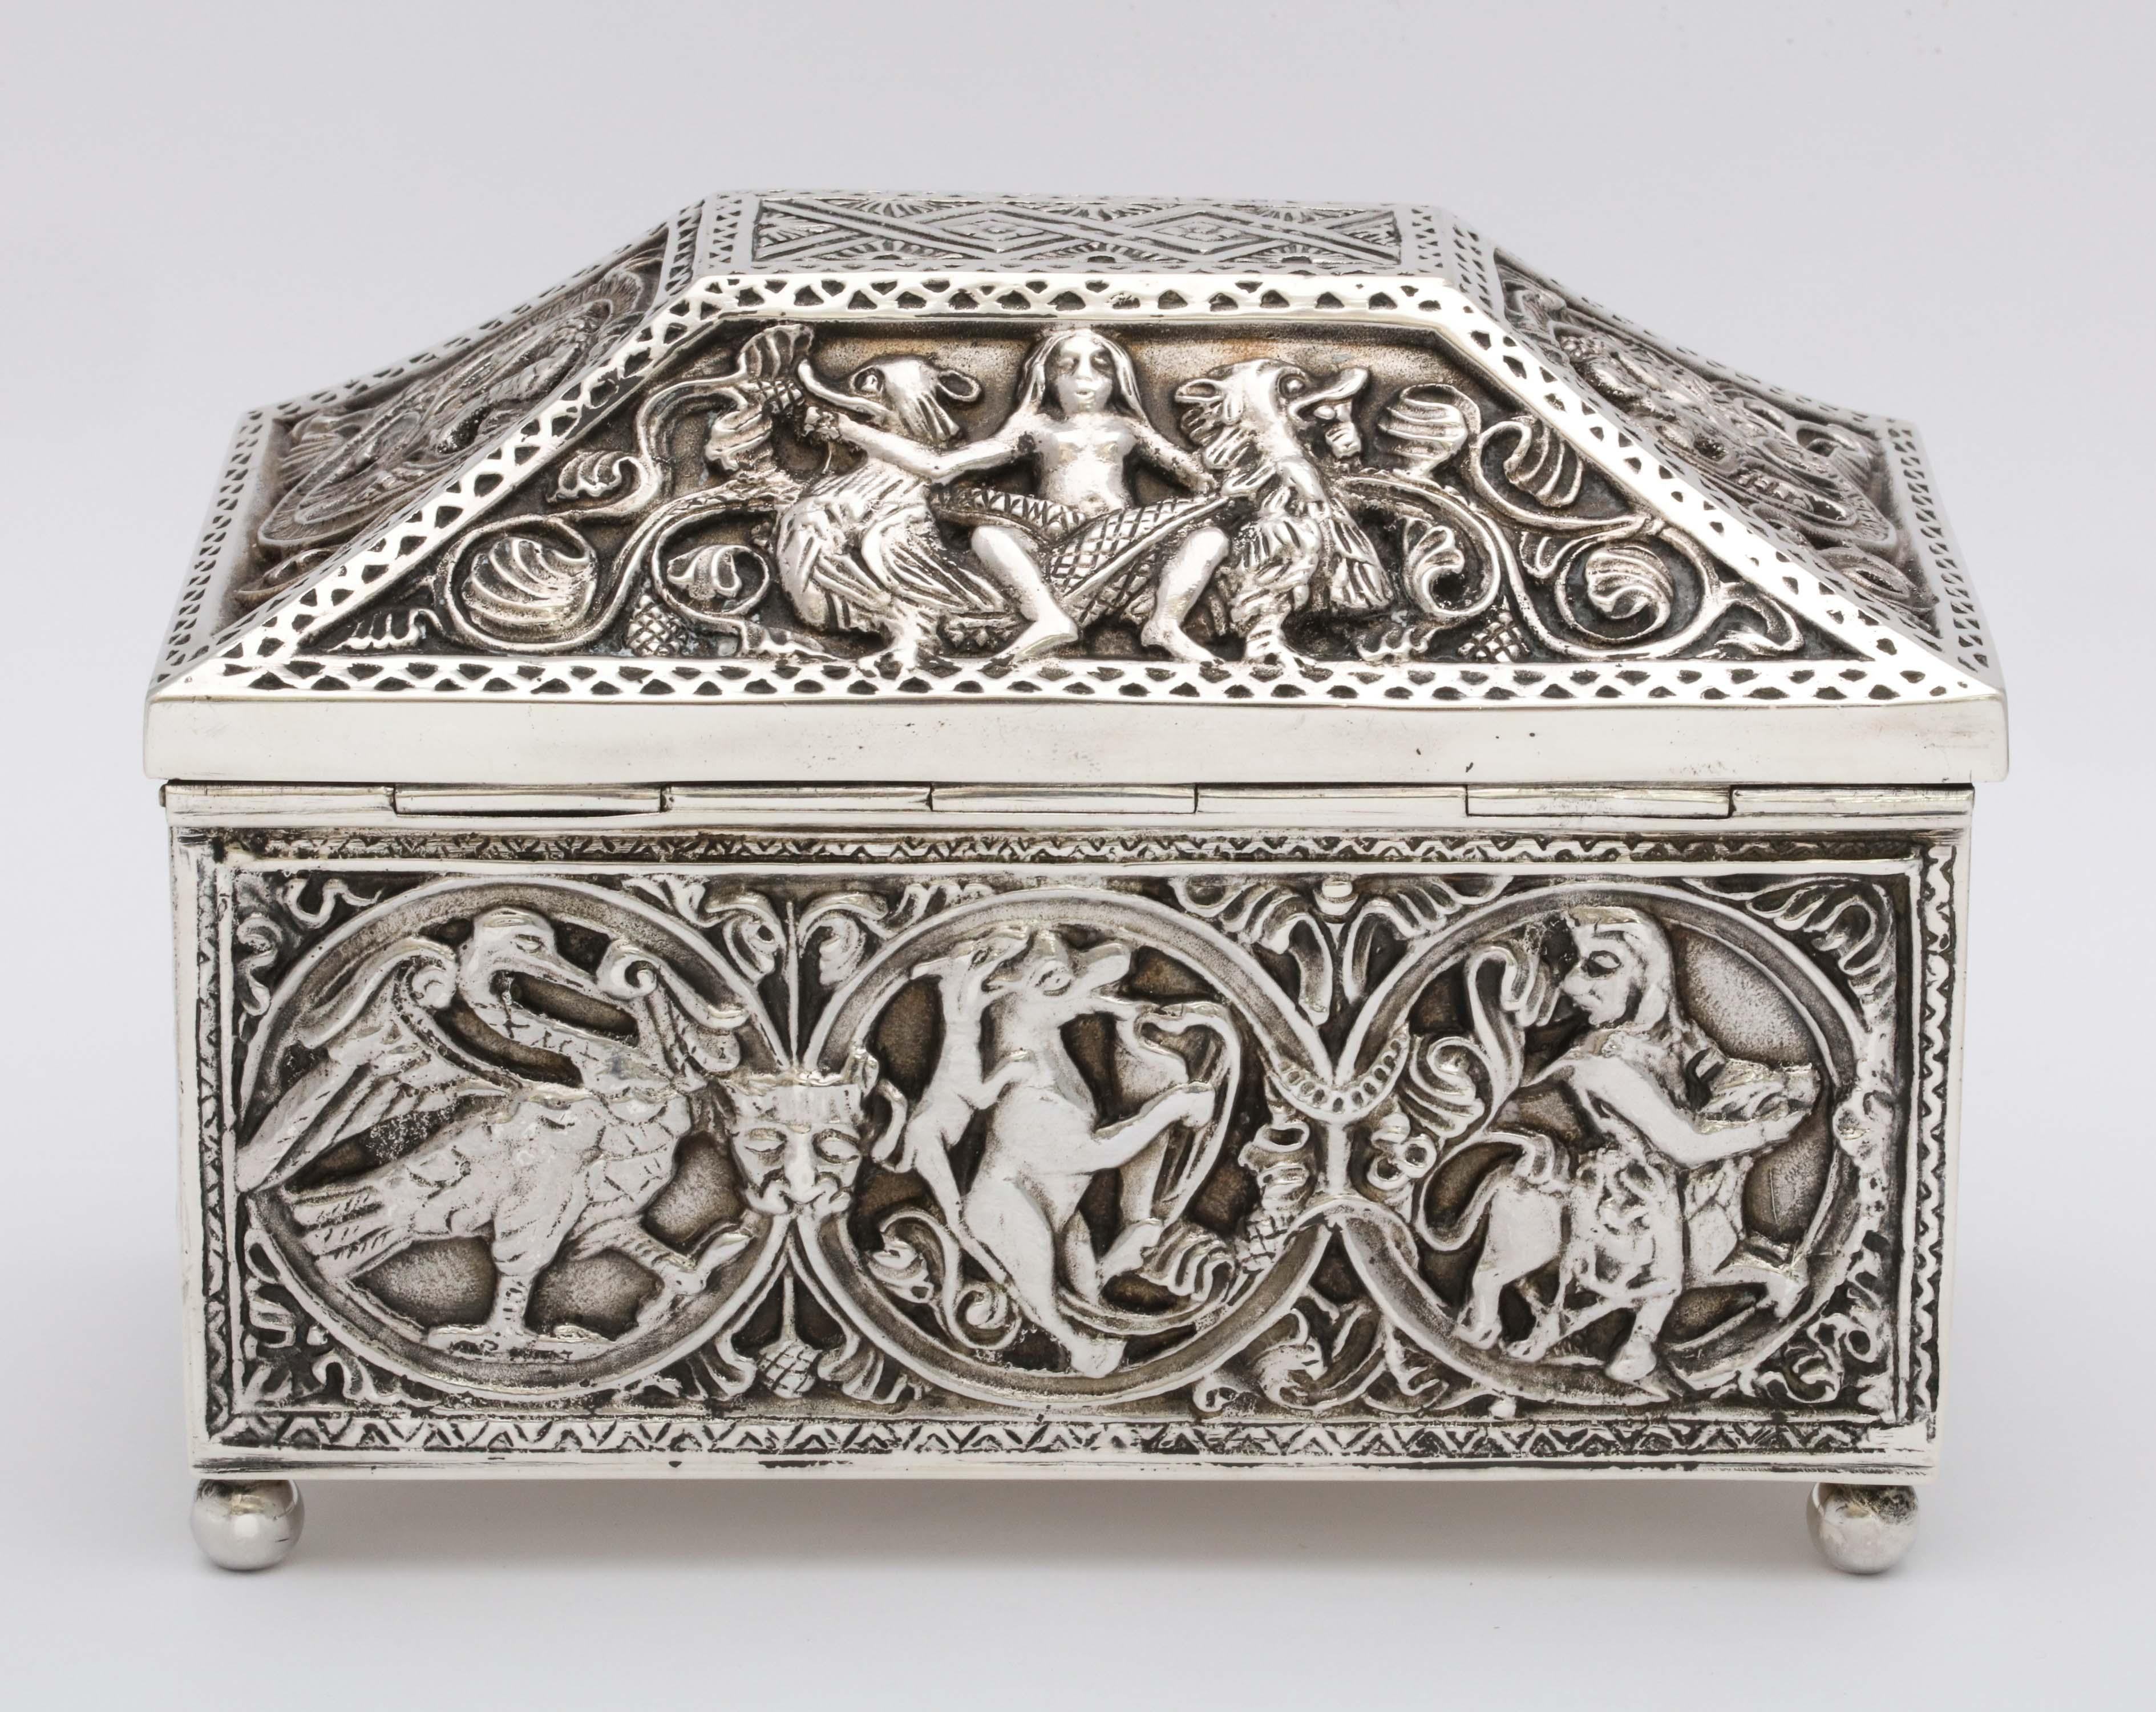 Medieval-Style Sterling Silver '.950' Footed Jewelry Box with Hinged Lid, Paris 1